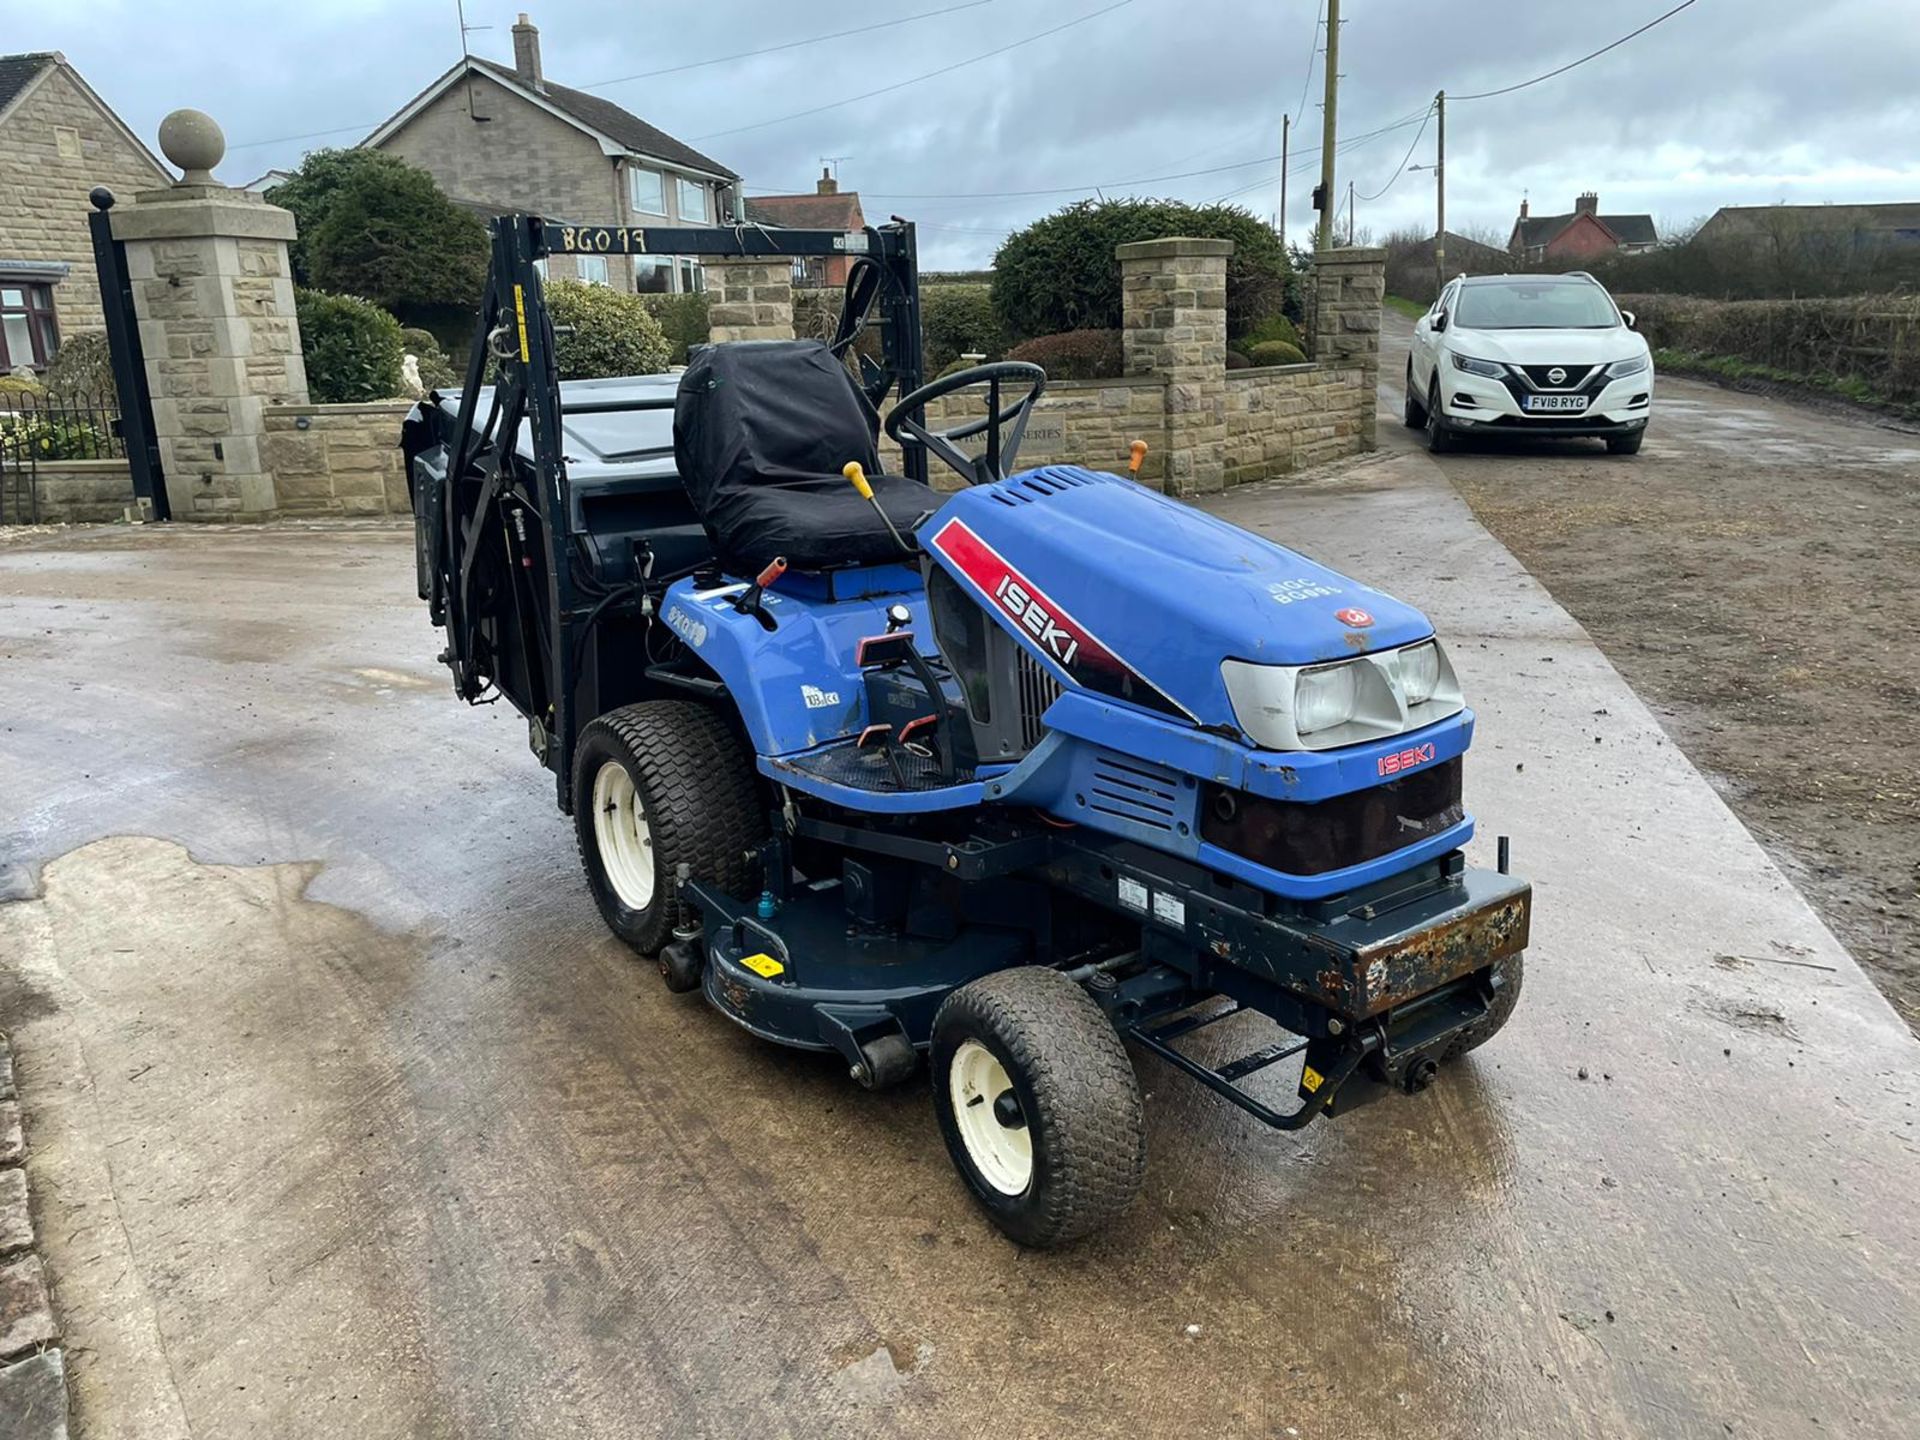 2010 ISEKI SXG19 RIDE ON MOWER, RUNS, DRIVES AND CUTS, IN USED BUT GOOD CONDITION *PLUS VAT* - Image 4 of 10